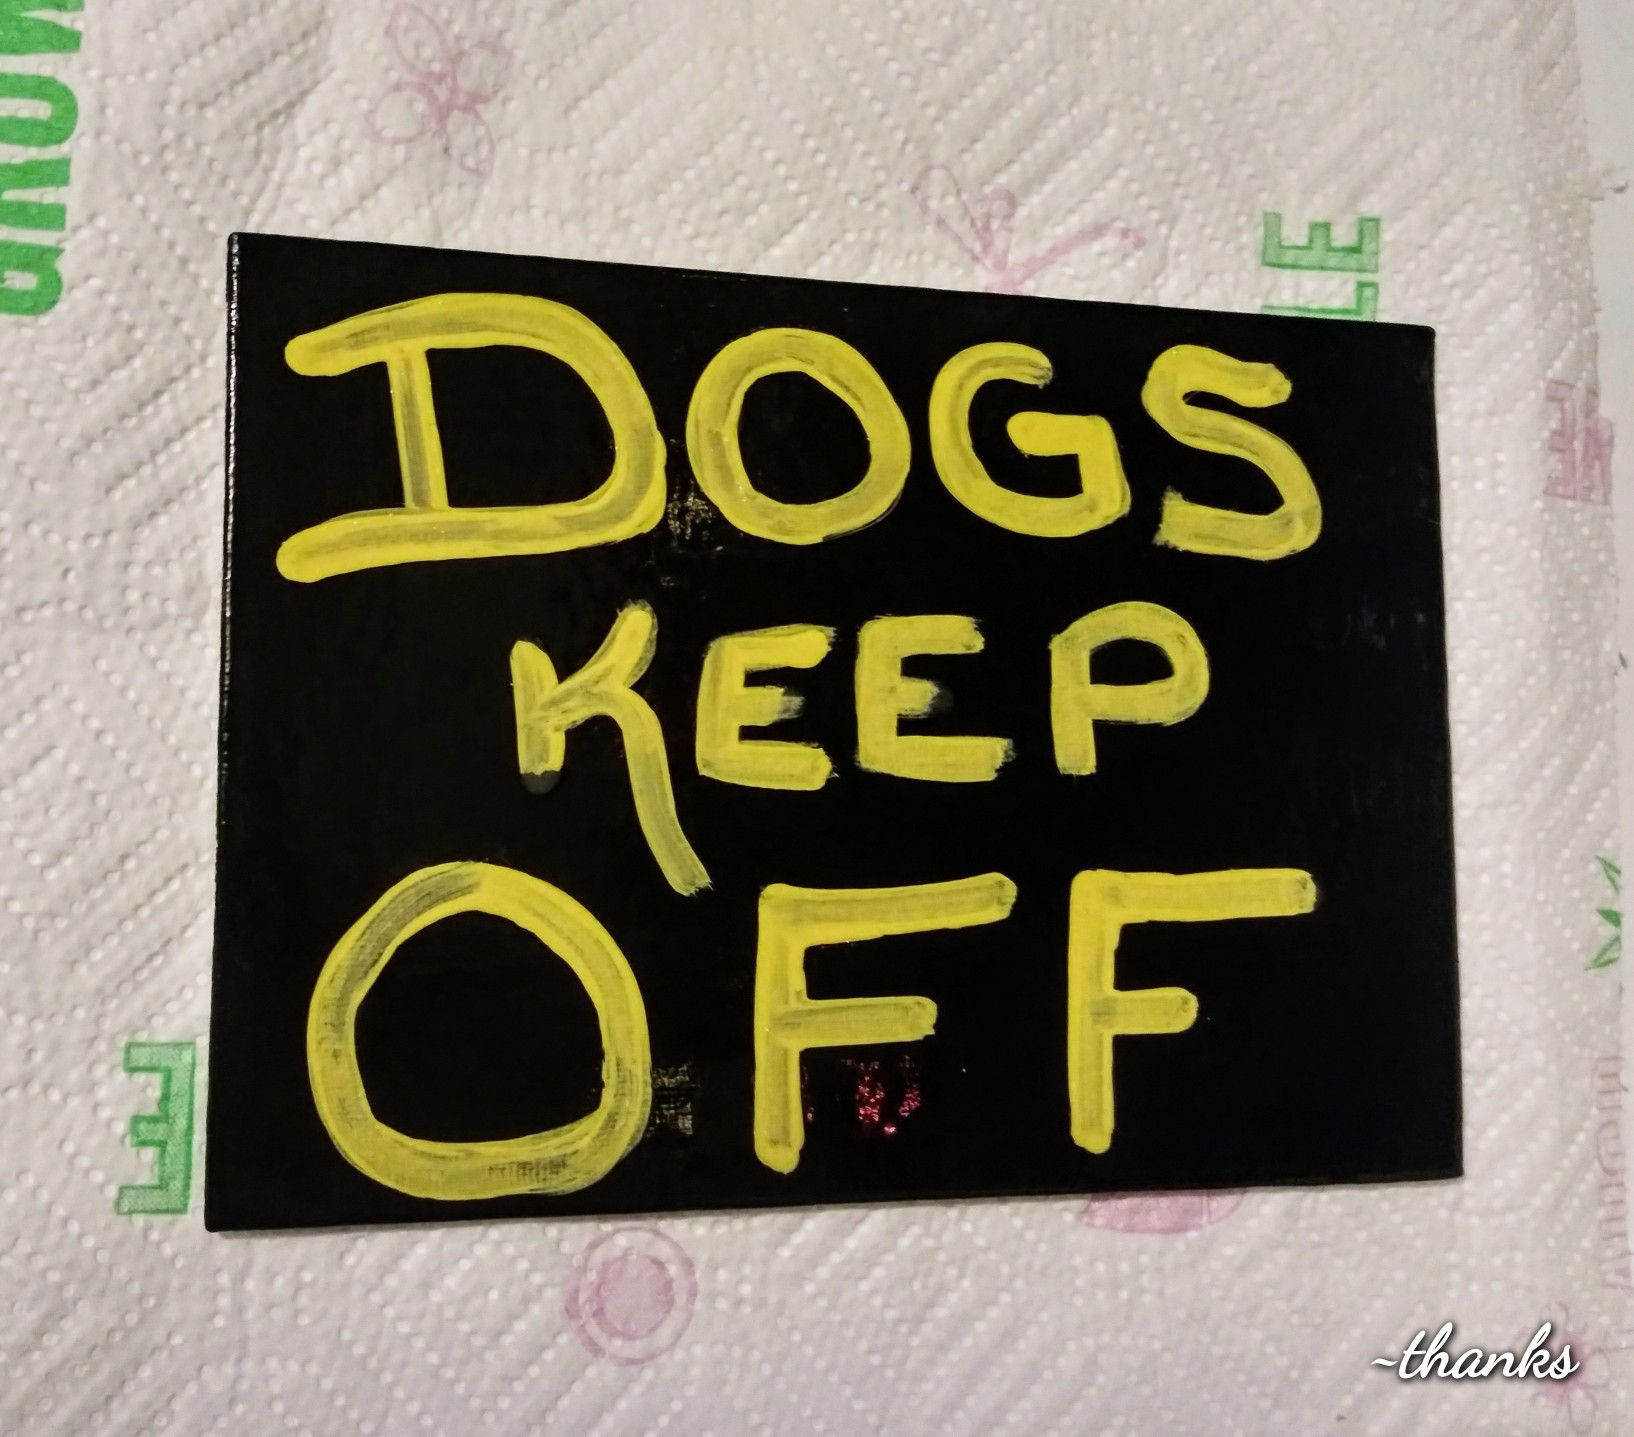 Sign " Dogs keep off"